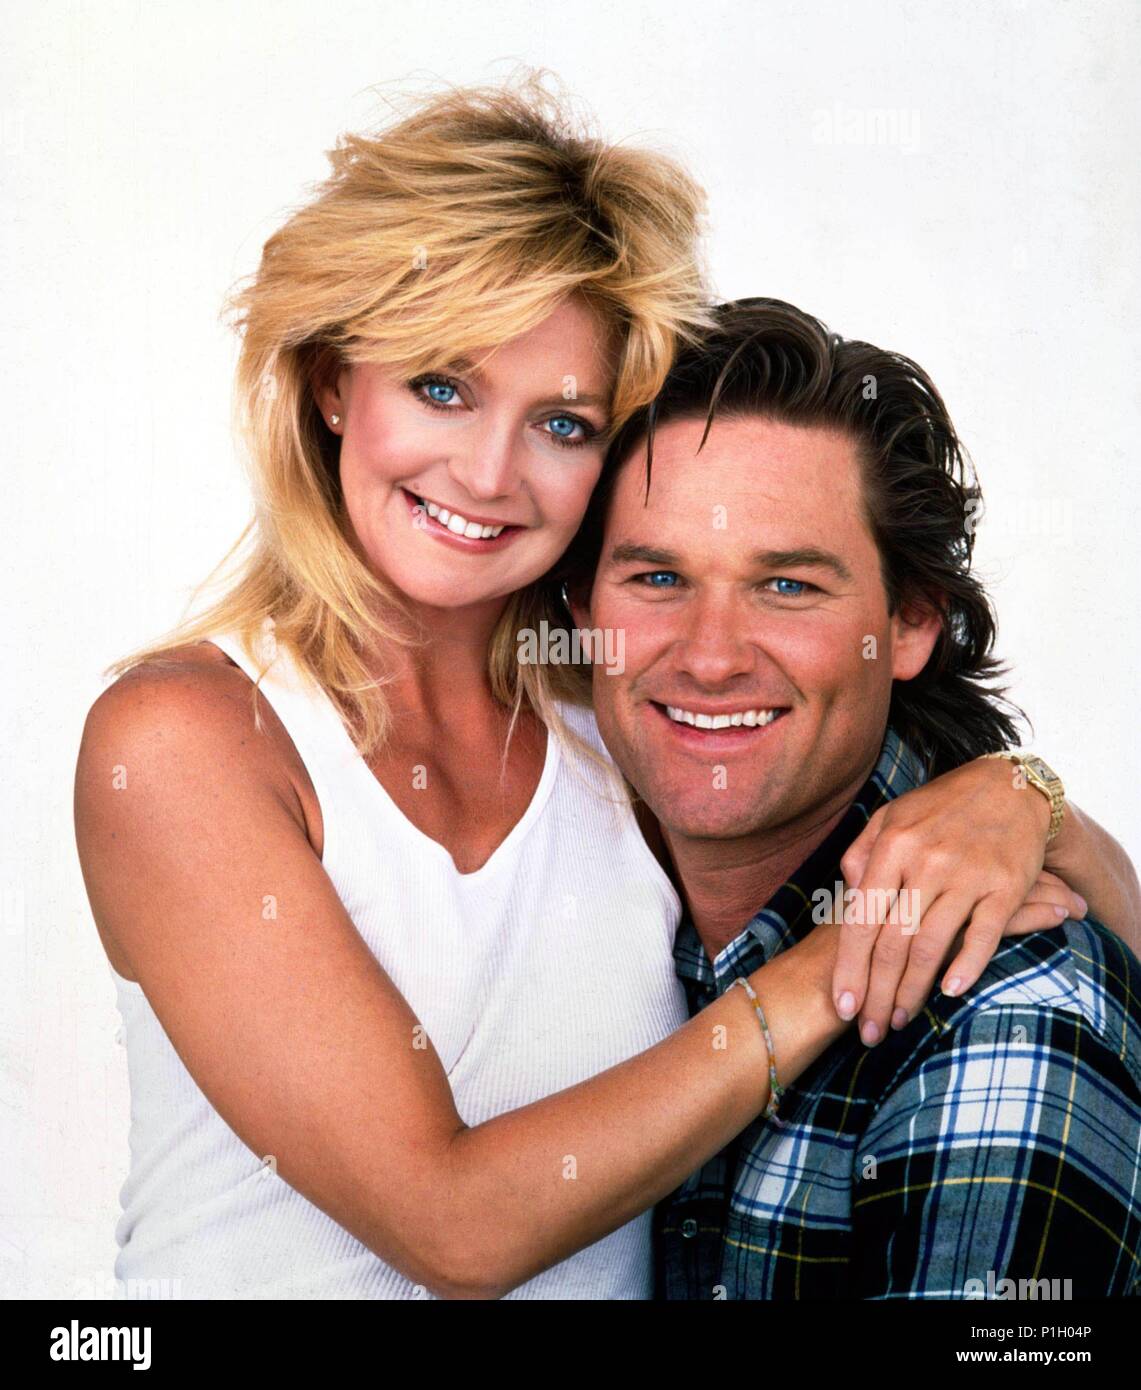 Original Film Title: OVERBOARD.  English Title: OVERBOARD.  Film Director: GARRY MARSHALL.  Year: 1987.  Stars: KURT RUSSELL; GOLDIE HAWN. Credit: M.G.M. / Album Stock Photo